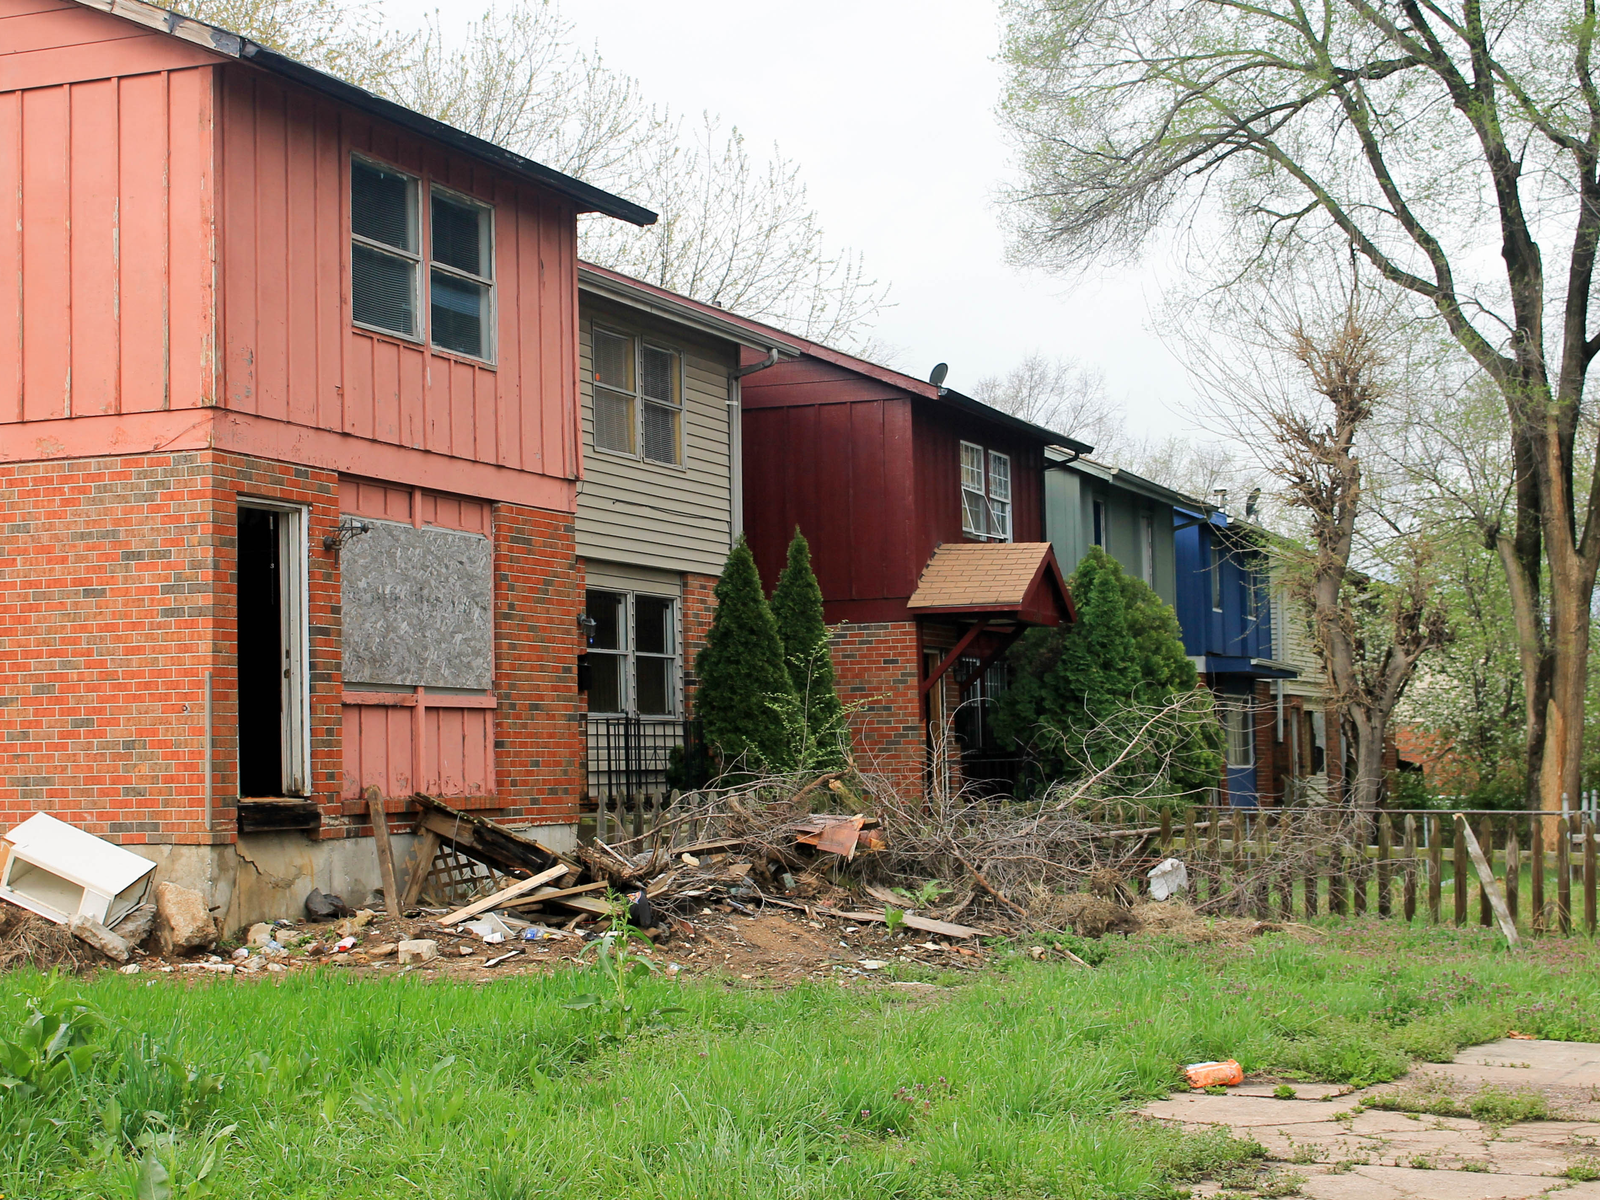 City blight in a bad neighborhood to avoid in St. Louis